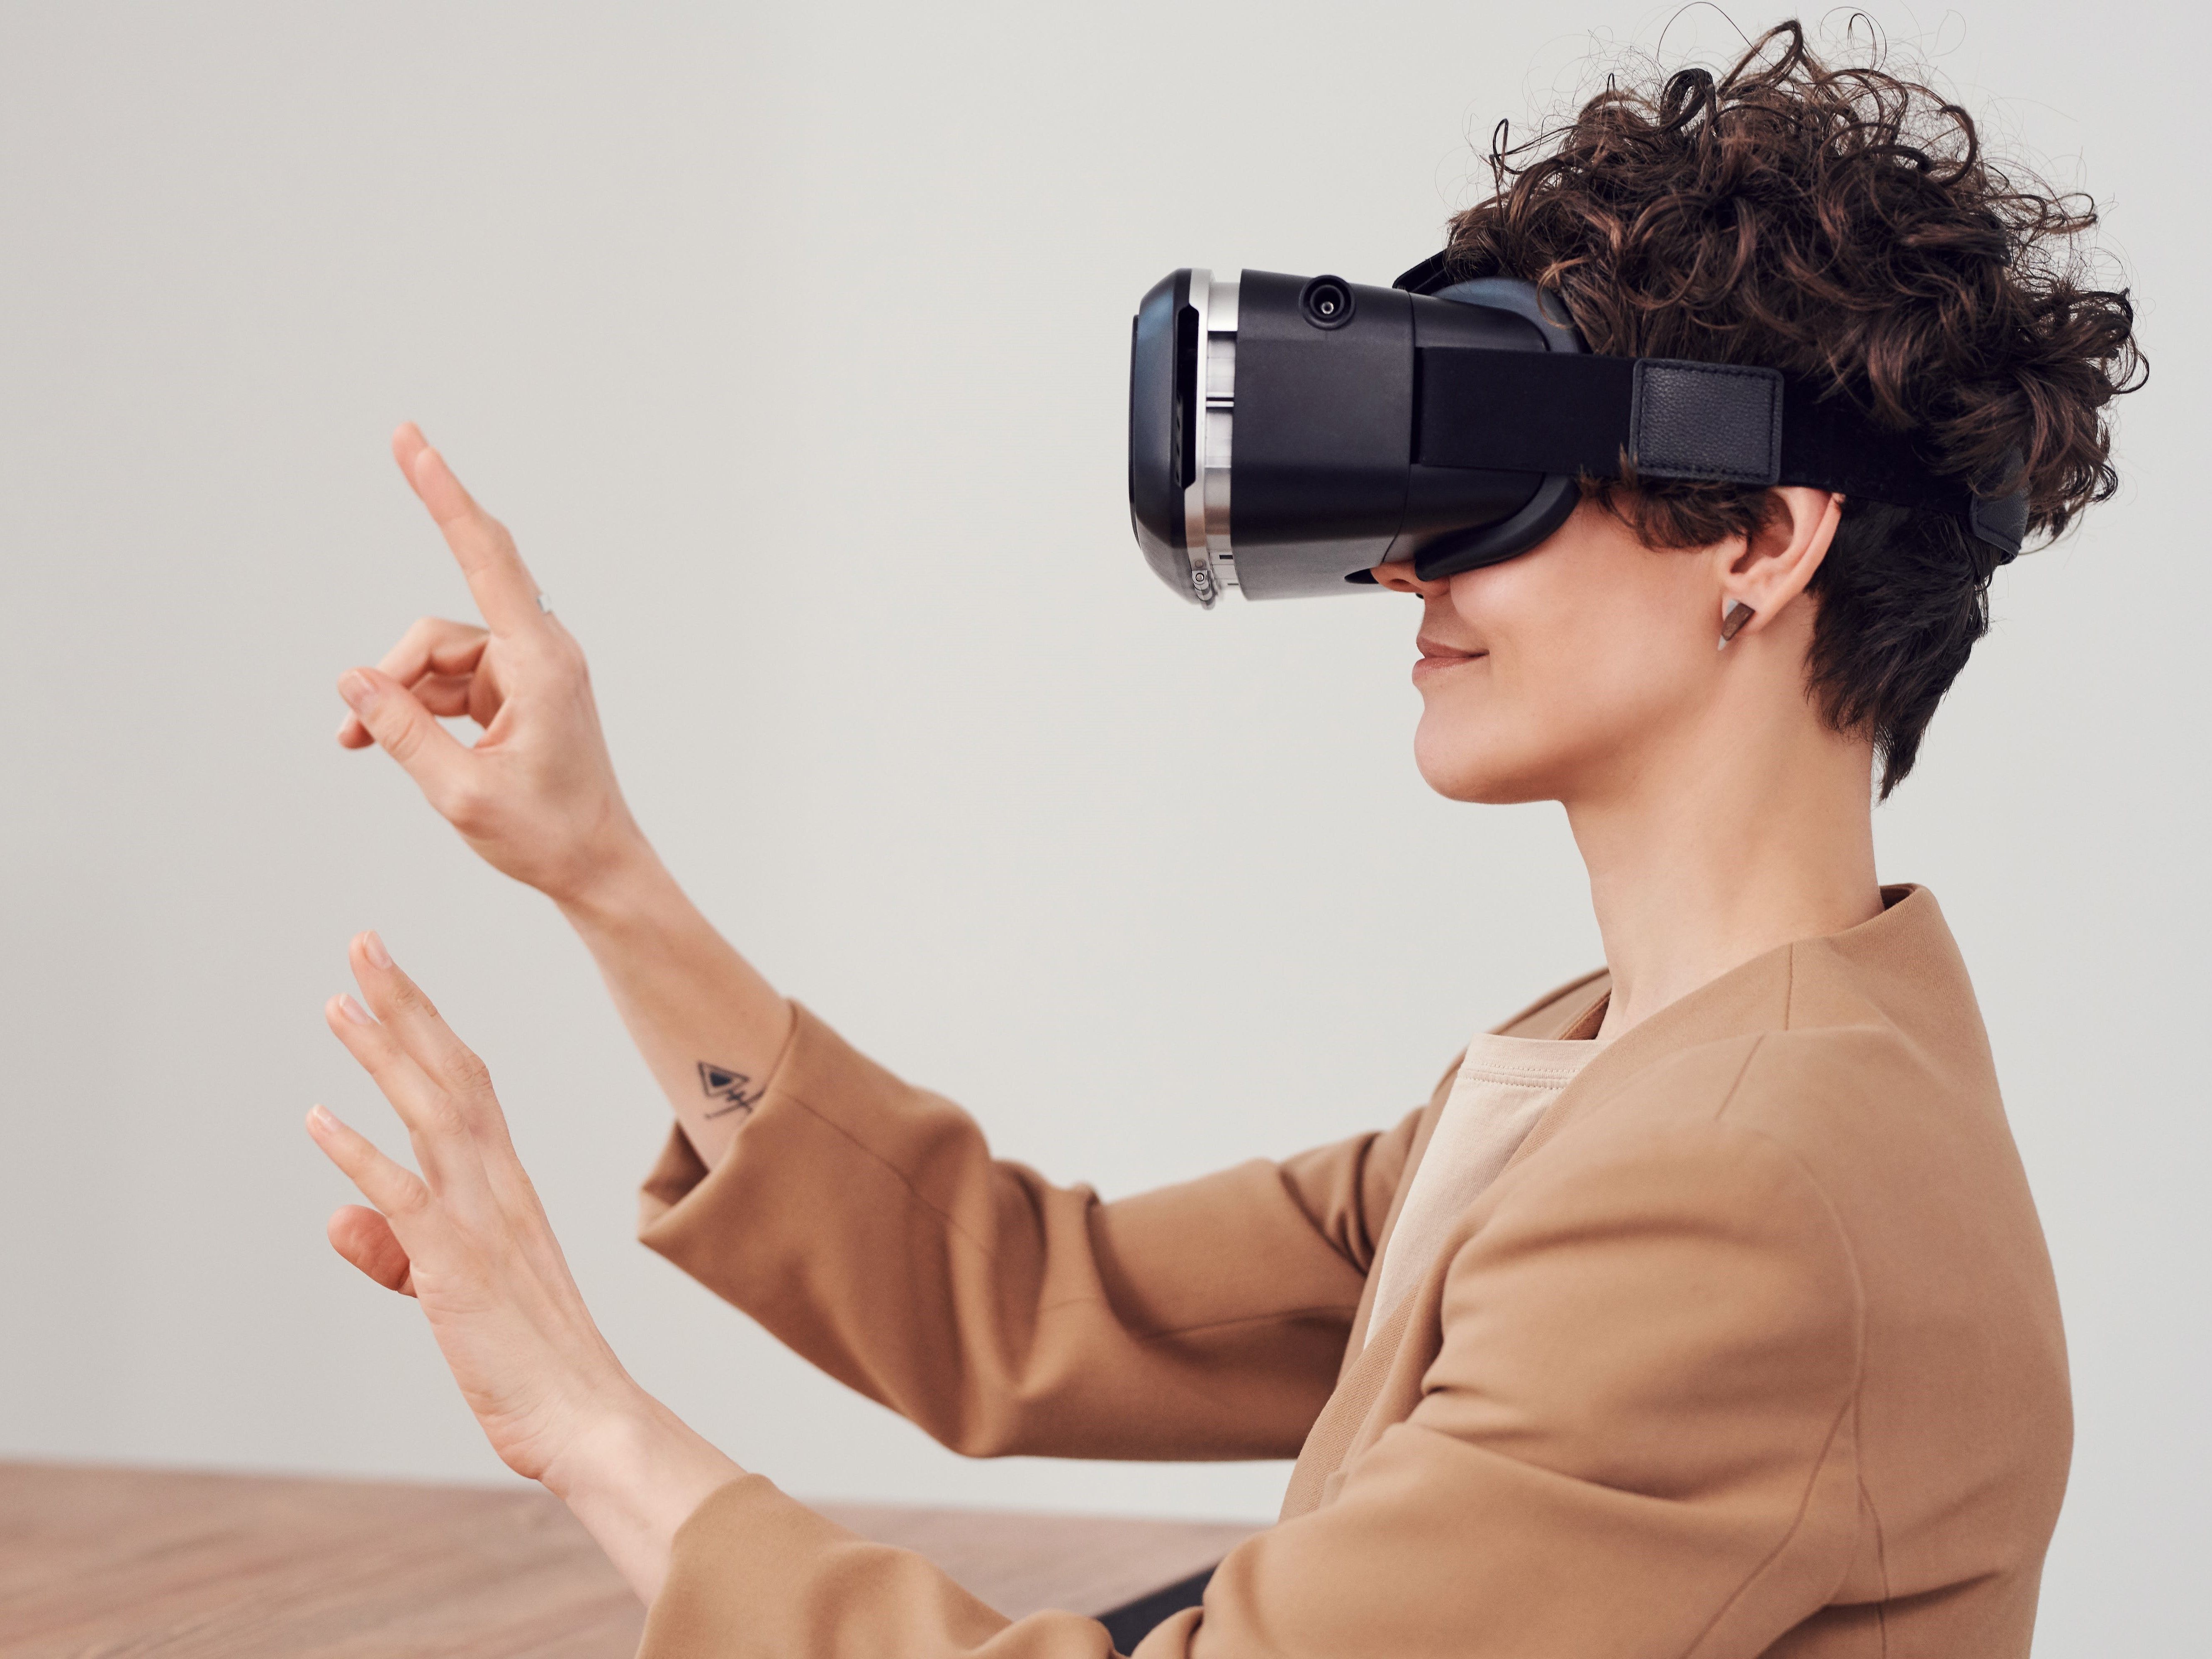 Woman using a VR headset with hand gestures